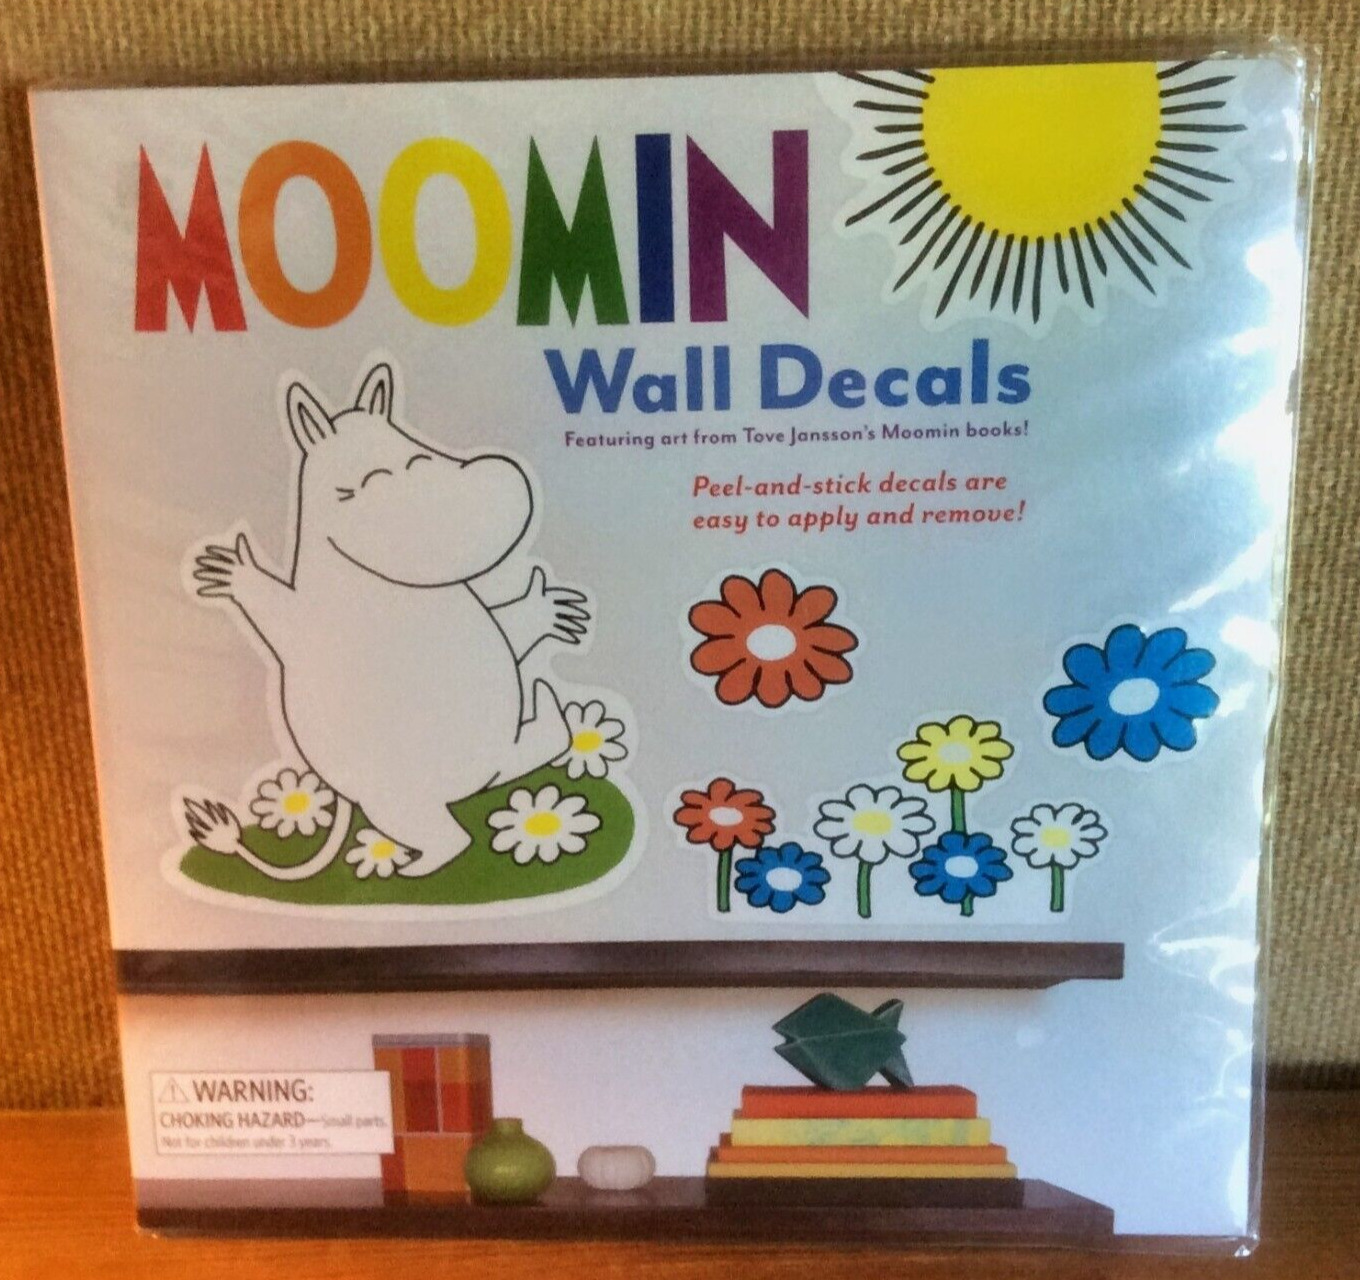 Moomin Wall Art Decals From Tove Jansson's Books Peel Stick Decals Full Color